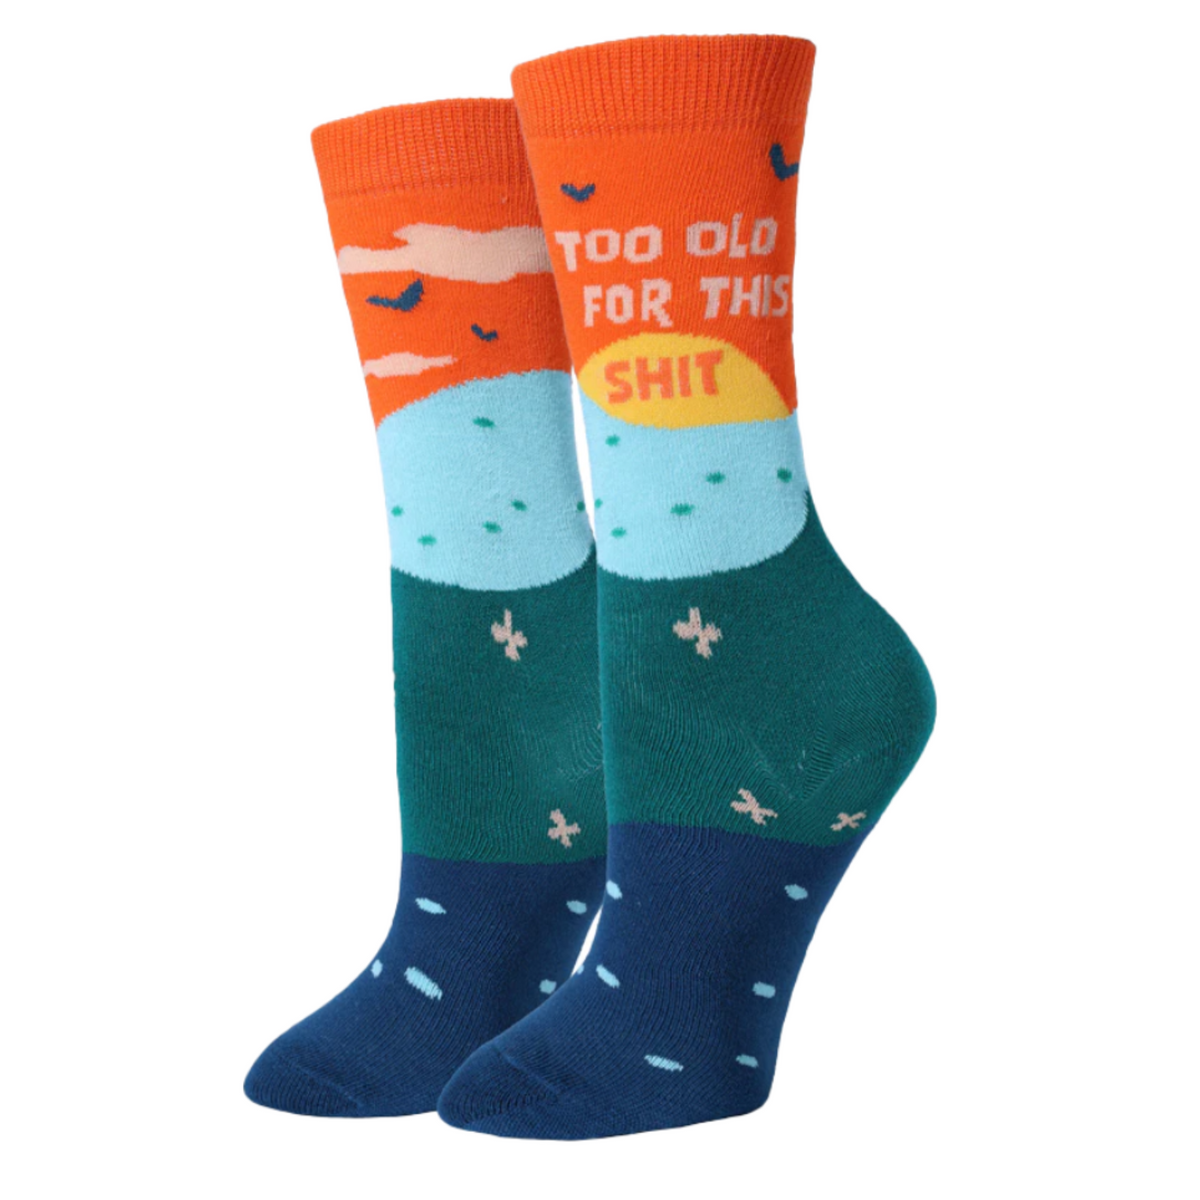 Sock Harbor Too Old For This Shit women&#39;s crew sock featuring orange, blue, and teal sock that says &quot;Too Old For This Shit&quot;. Socks shown on display feet. 